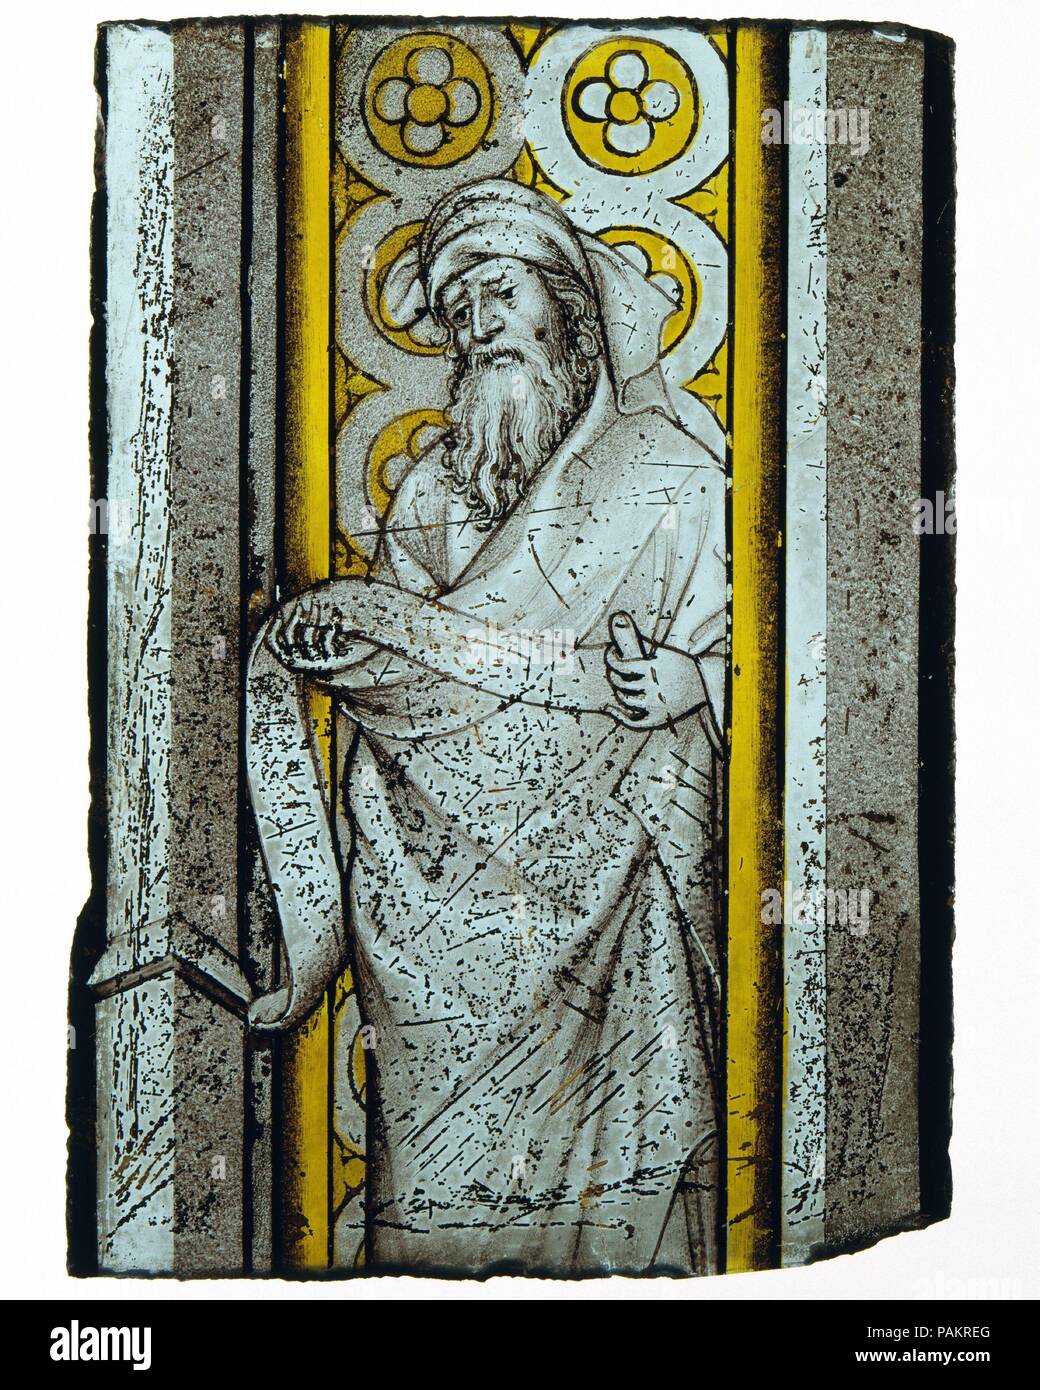 Prophet from a Throne of Solomon. Culture: French or South Netherlandish. Dimensions: Overall: 9 x 4 1/2 in. (22.9 x 11.4 cm). Date: ca. 1390-1410.  Uncommonly refined and gemlike in its painterly finesse, this stained-glass fragment with a prophet is related stylistically to the work of André Beauneveu (1335-1401/3), a gifted sculptor, painter, and illuminator from the South Lowlands, who was employed by King Charles V of France; Louis de Mâle, comte de Flandres; Philippe le Hardi, duc de Bourgogne; and Jean, duc de Berry, among others. A close parallel to the figure style--particularly to th Stock Photo